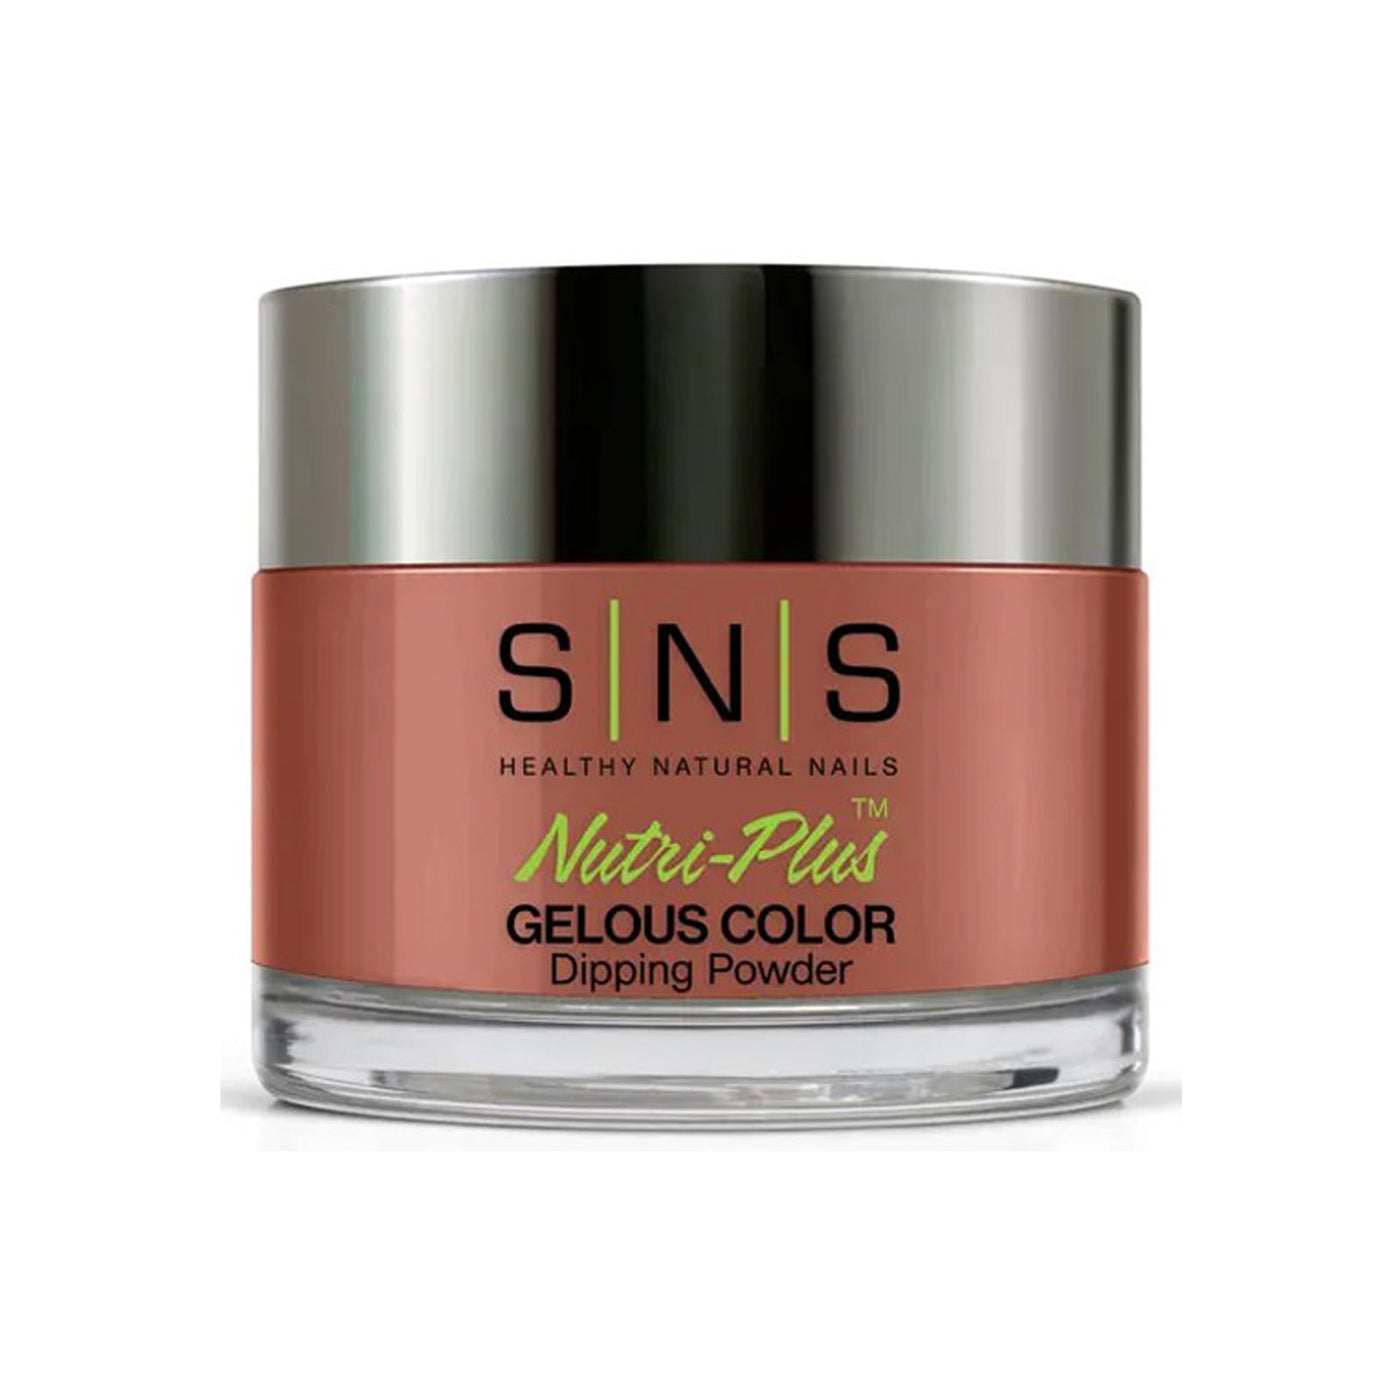 SNS Gelous Color Dipping Powder SL24 Two Lips Locked (43g) packaging